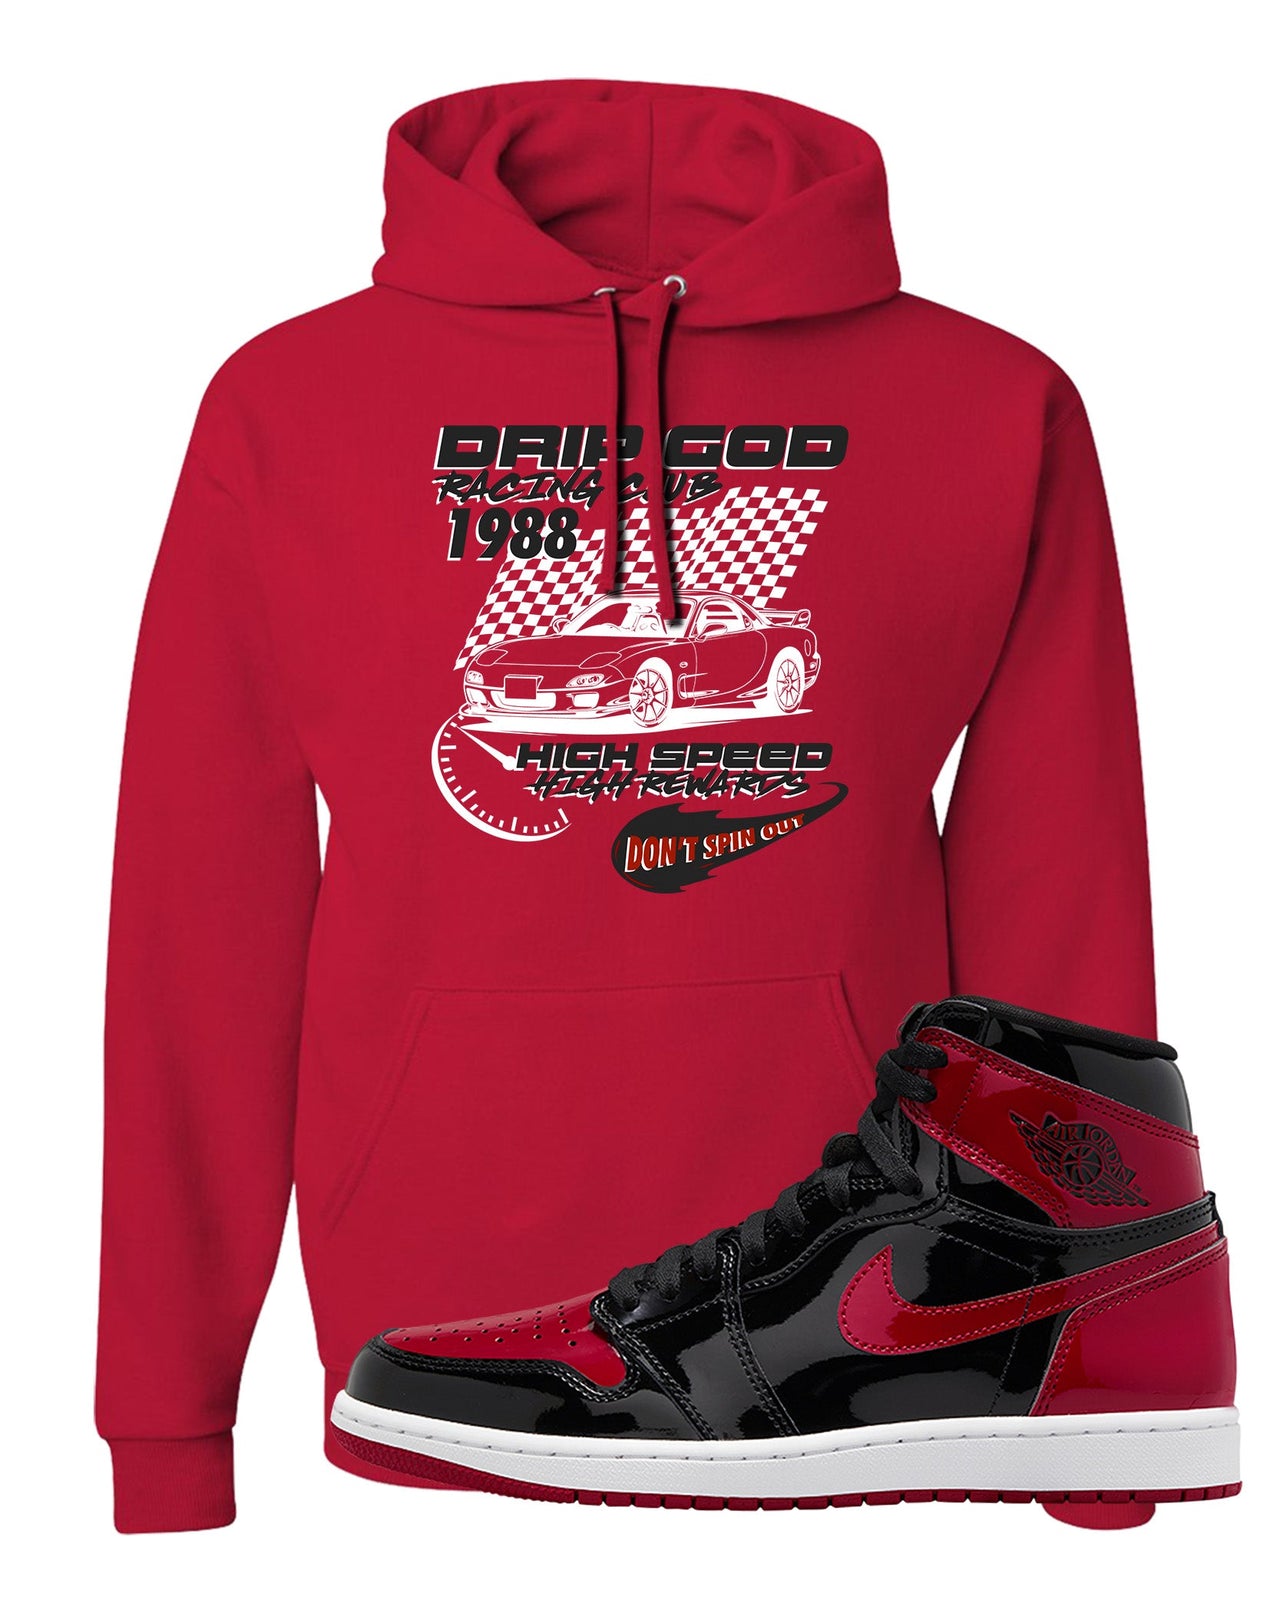 Patent Bred 1s Hoodie | Drip God Racing Club, Red